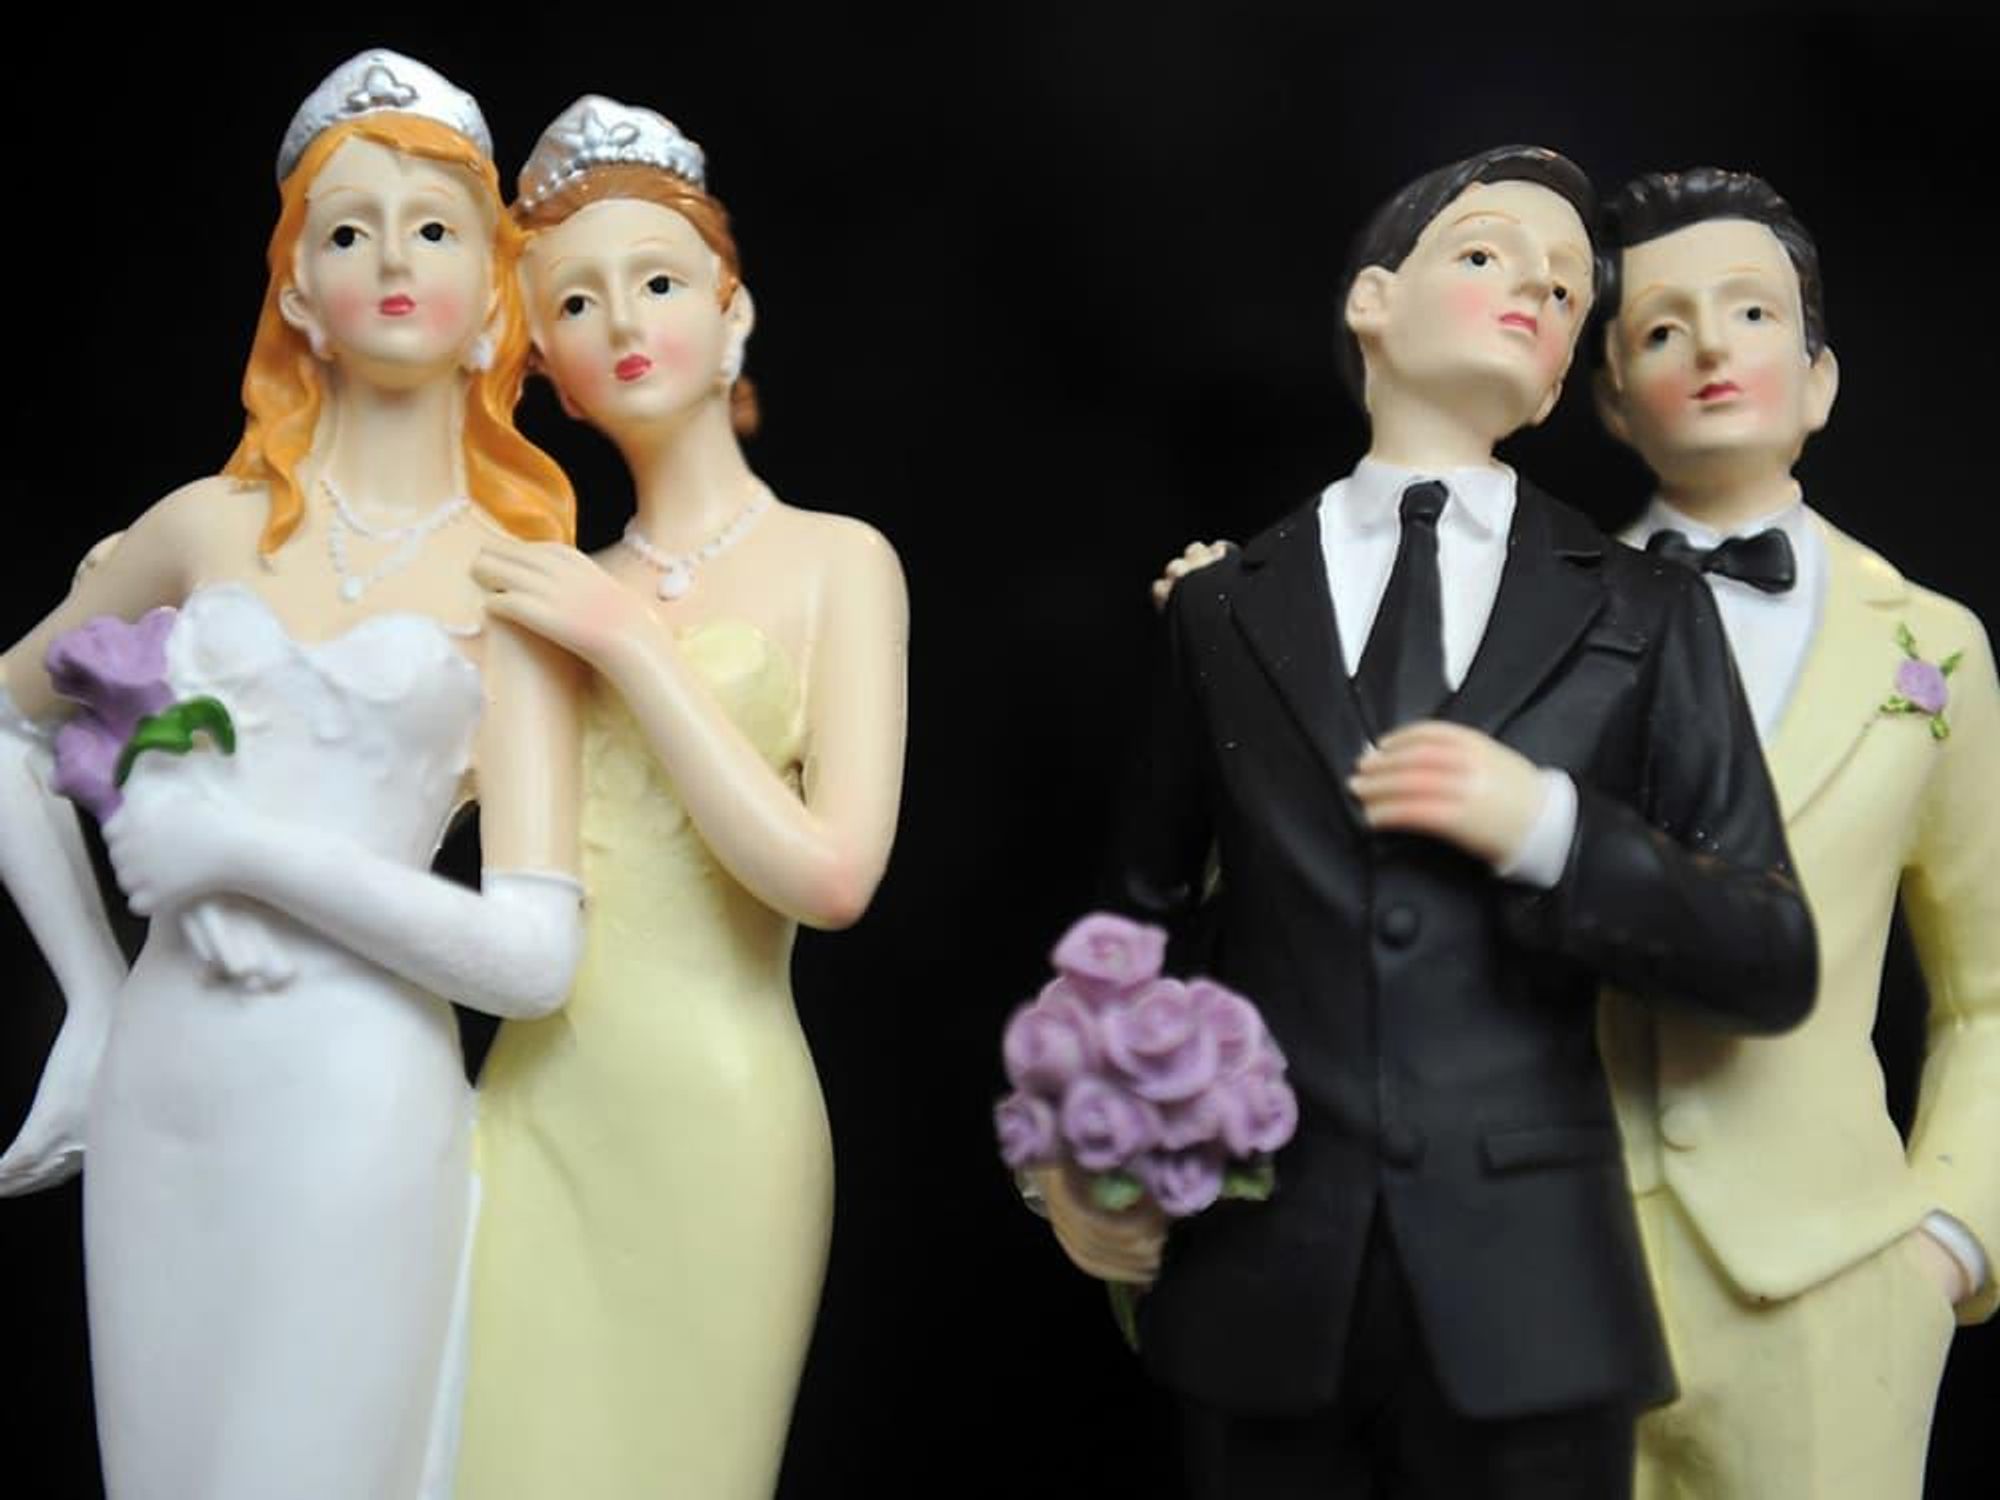 gay marriage two ladies cake toppers and two men cake toppers